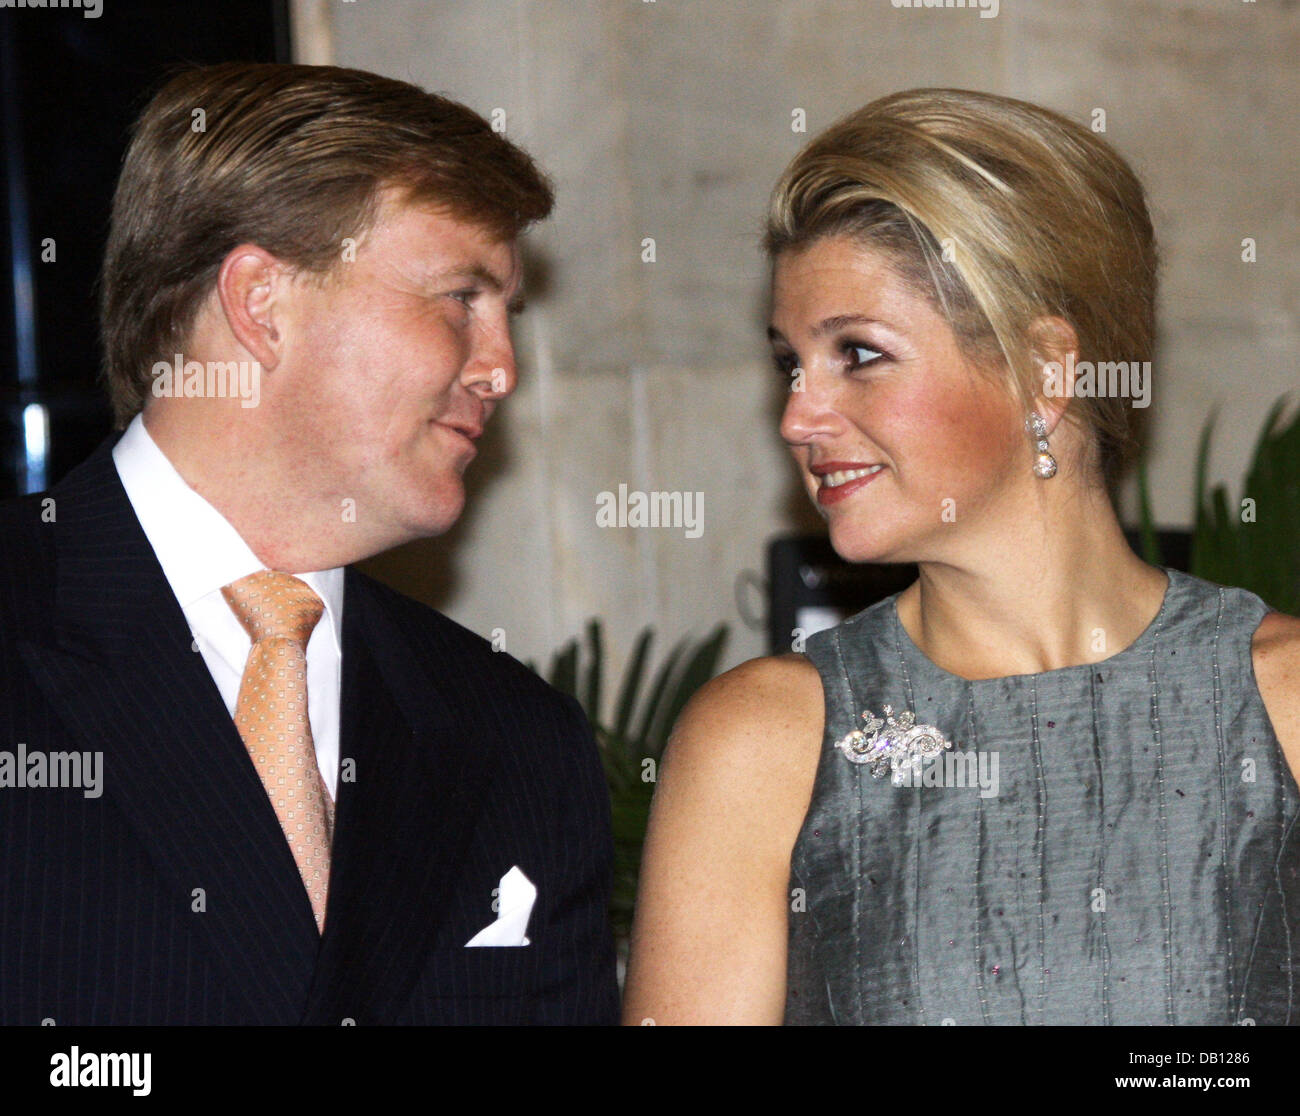 the-picture-shows-dutch-crown-princess-maxima-r-with-her-husband-crown-DB1286.jpg